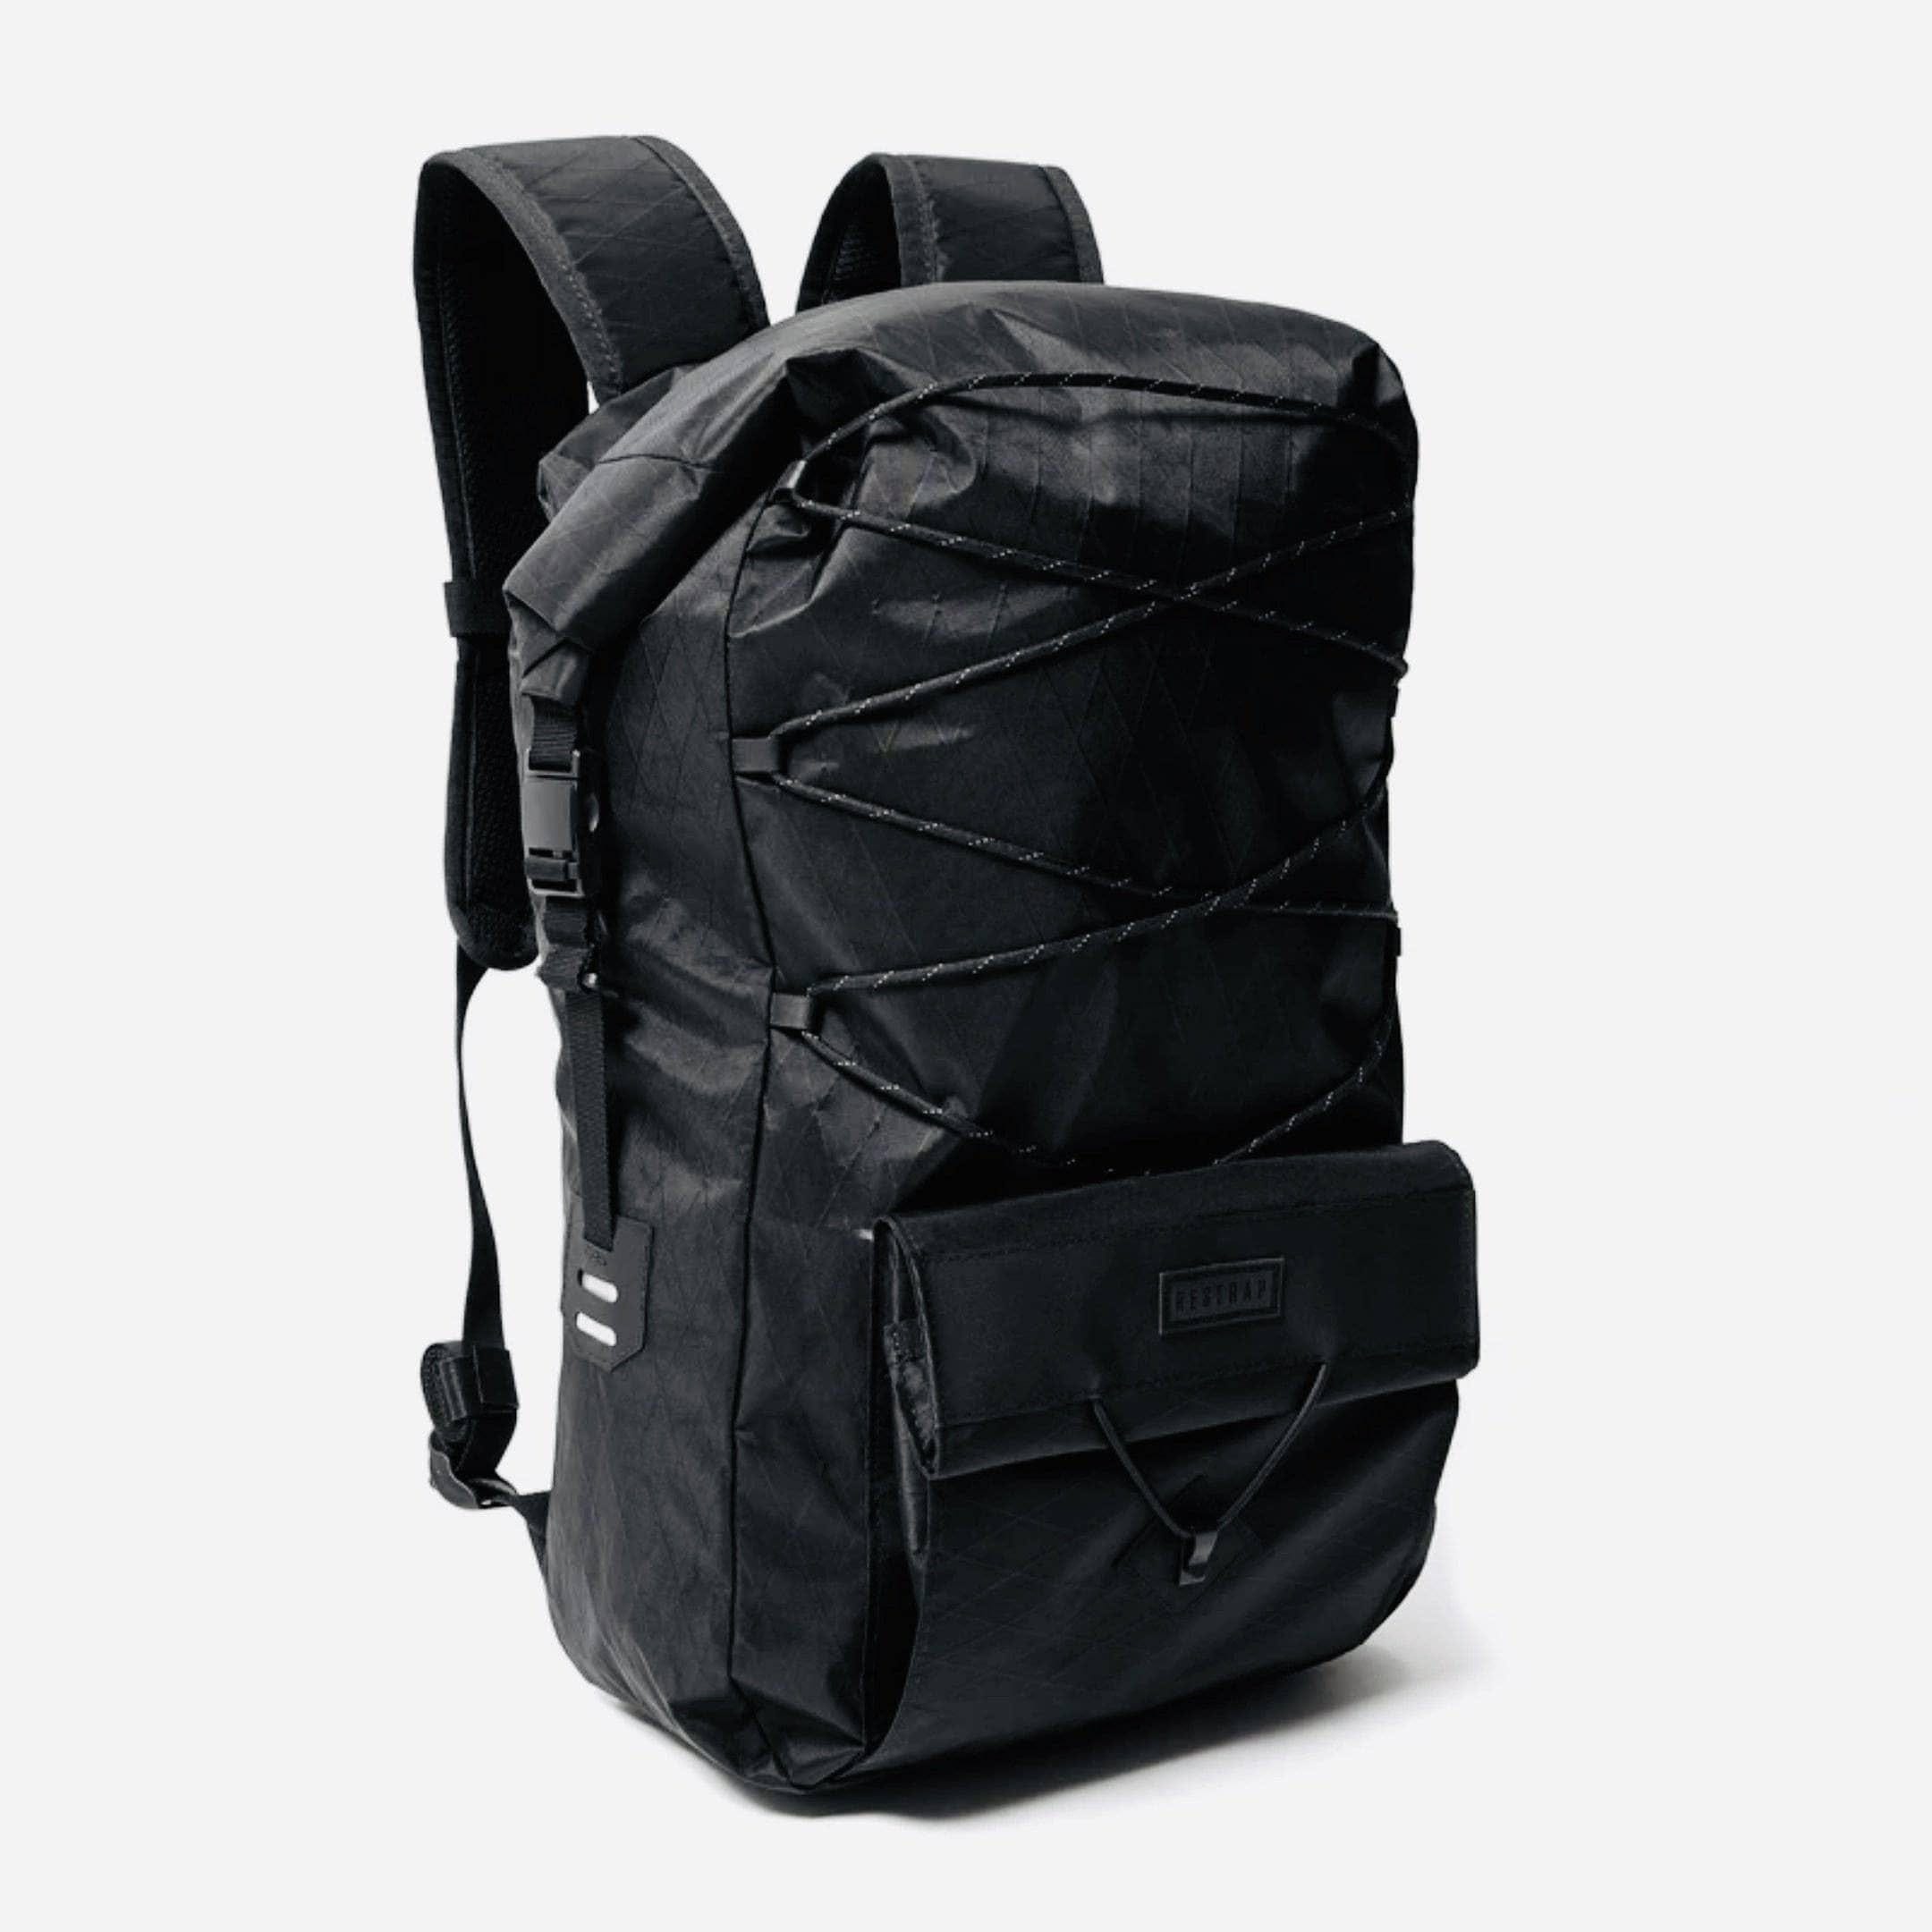 Restrap Ascent Backpack Black Accessories - Bags - Backpacks